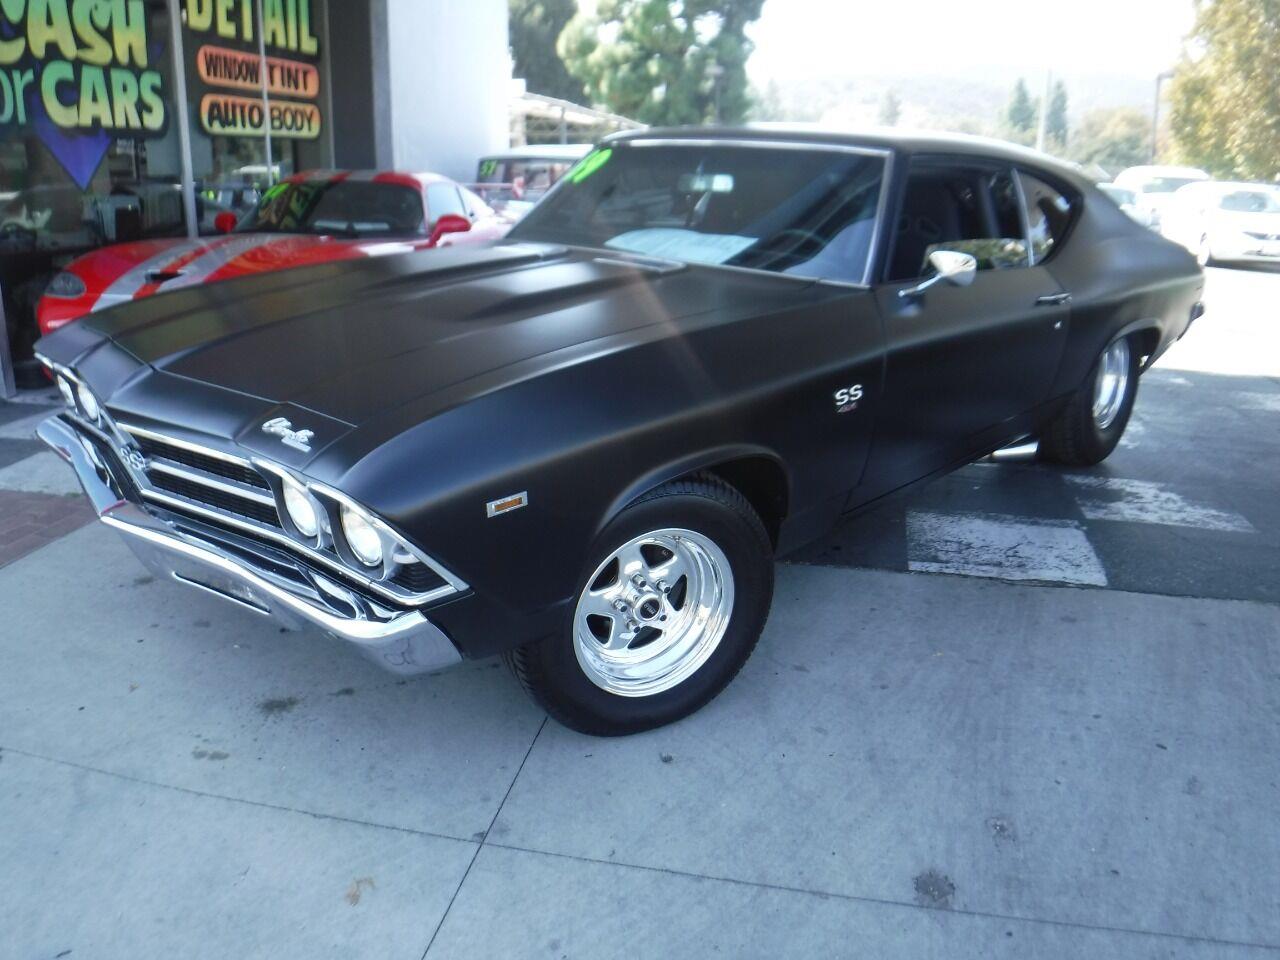 1969 Chevrolet Chevelle for sale in Thousand Oaks, CA – photo 2